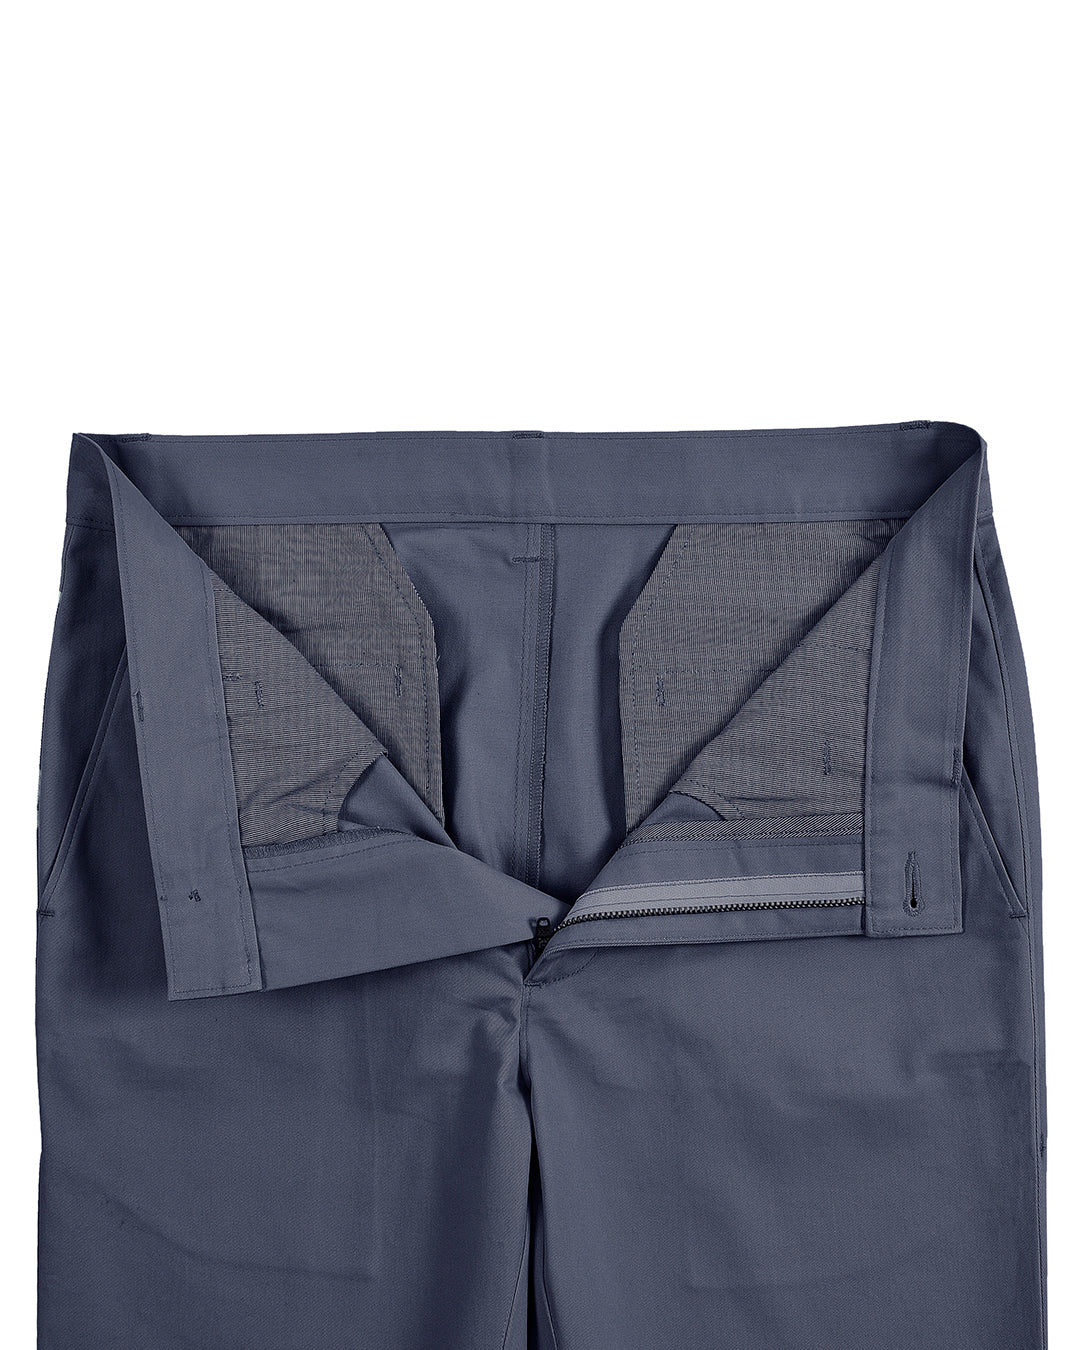 Open front view of custom Genoa Chino pants for men by Luxire in grey